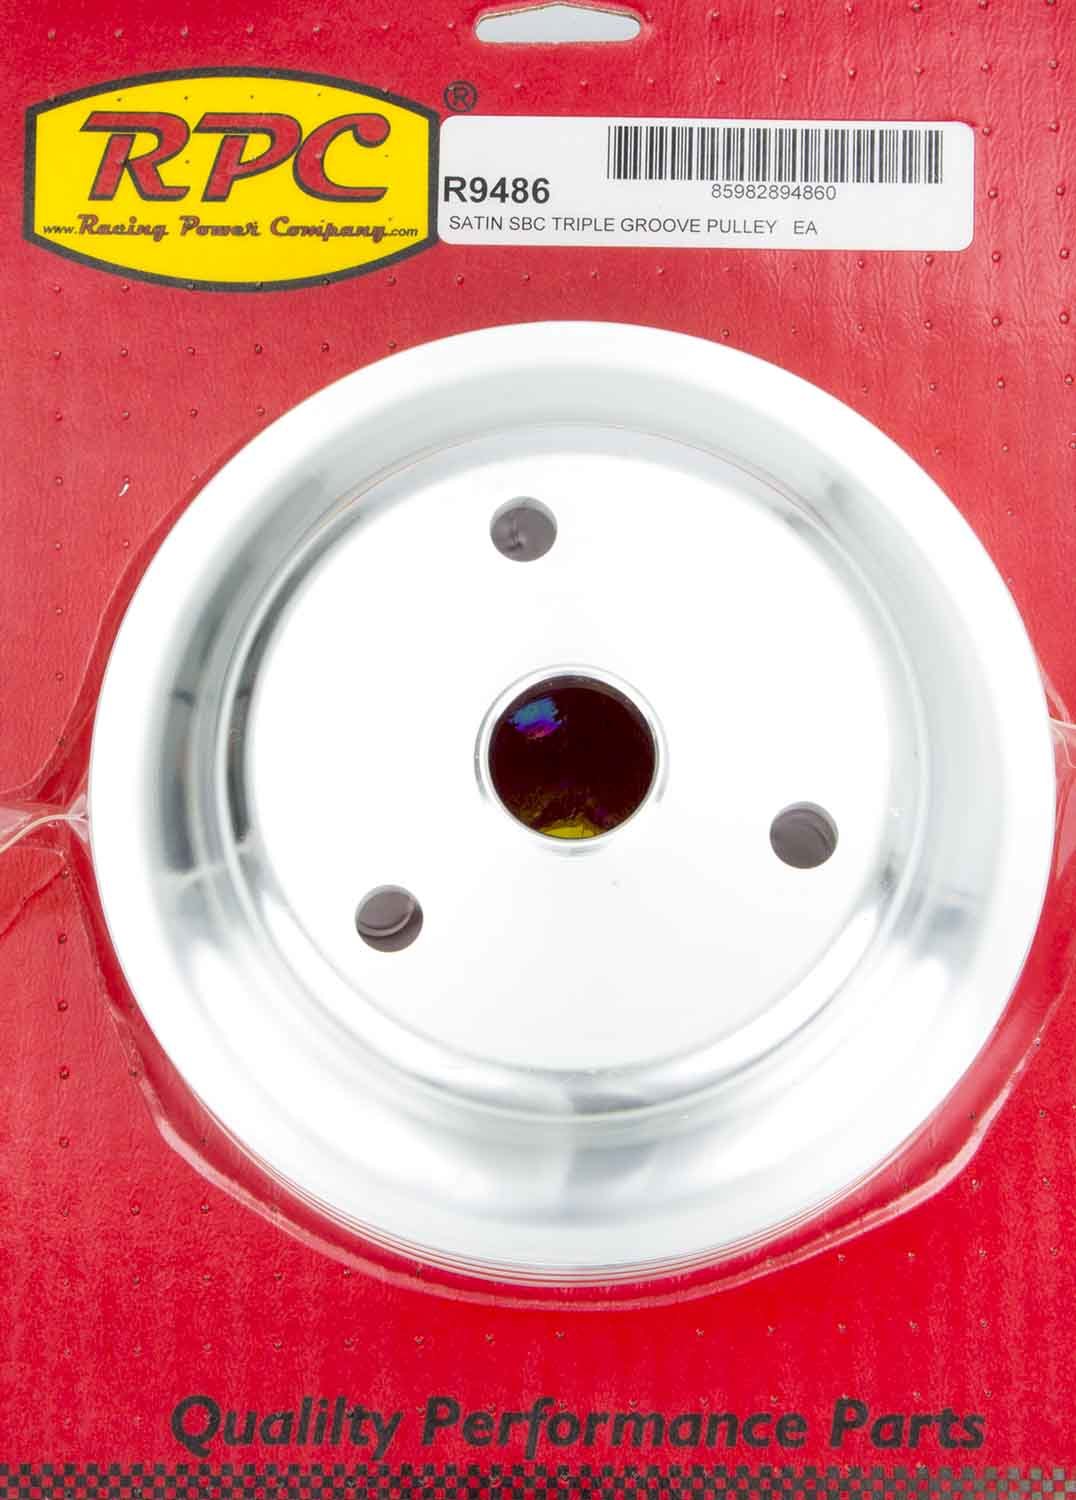 Racing Power Company R9486 - Aluminum Pulley 